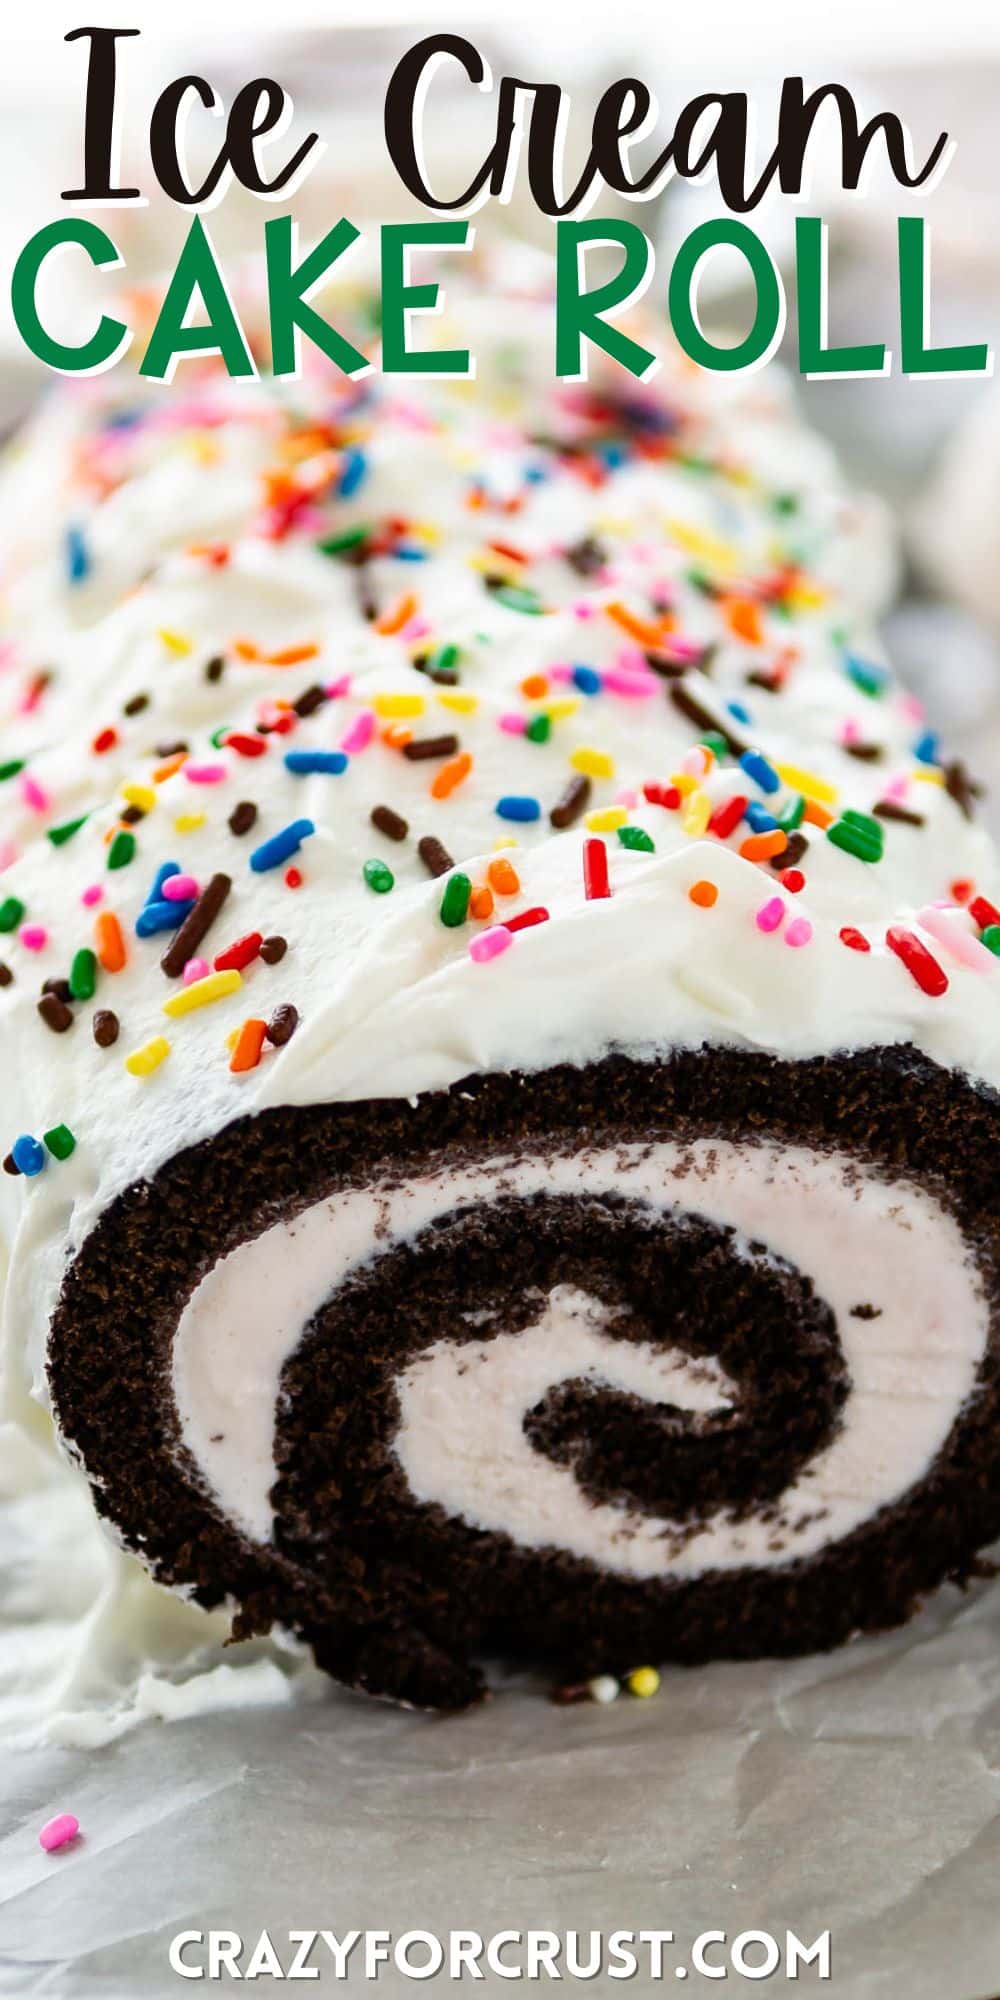 chocolate cake roll covered in white frosting and colorful sprinkles with words on the image.